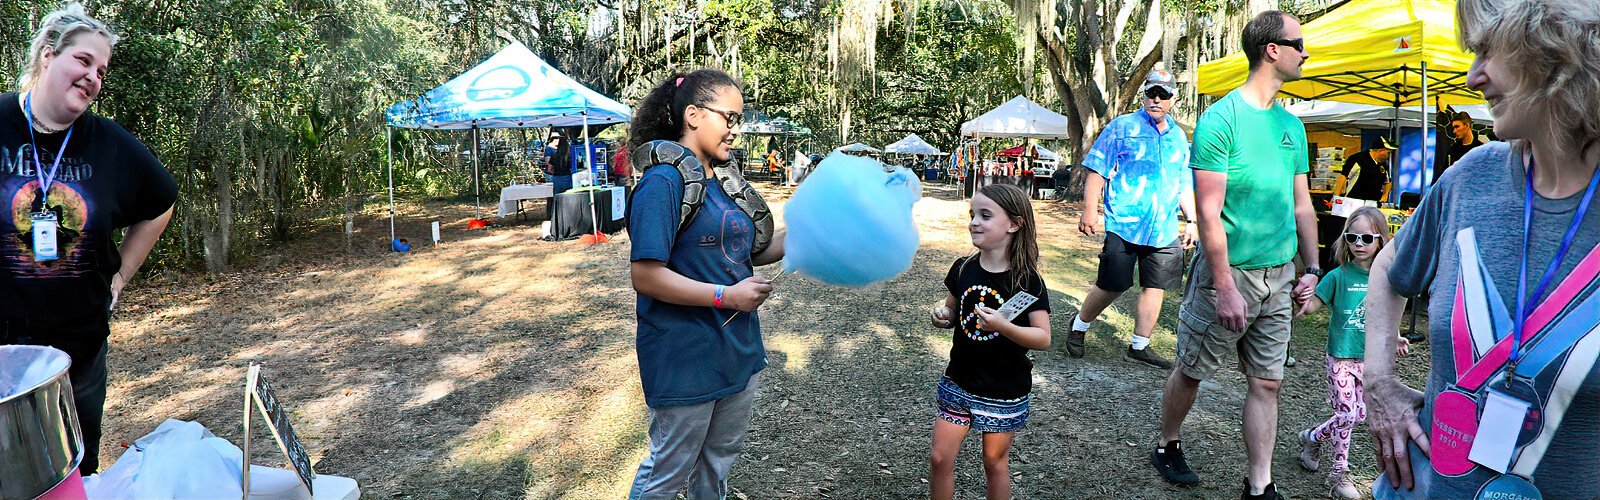 As big a treat as this cotton candy, the fifth annual Wonders of Wildlife Festival was a well-attended, family-friendly event that educates, delights and grows bigger every year with new attractions and vendors.